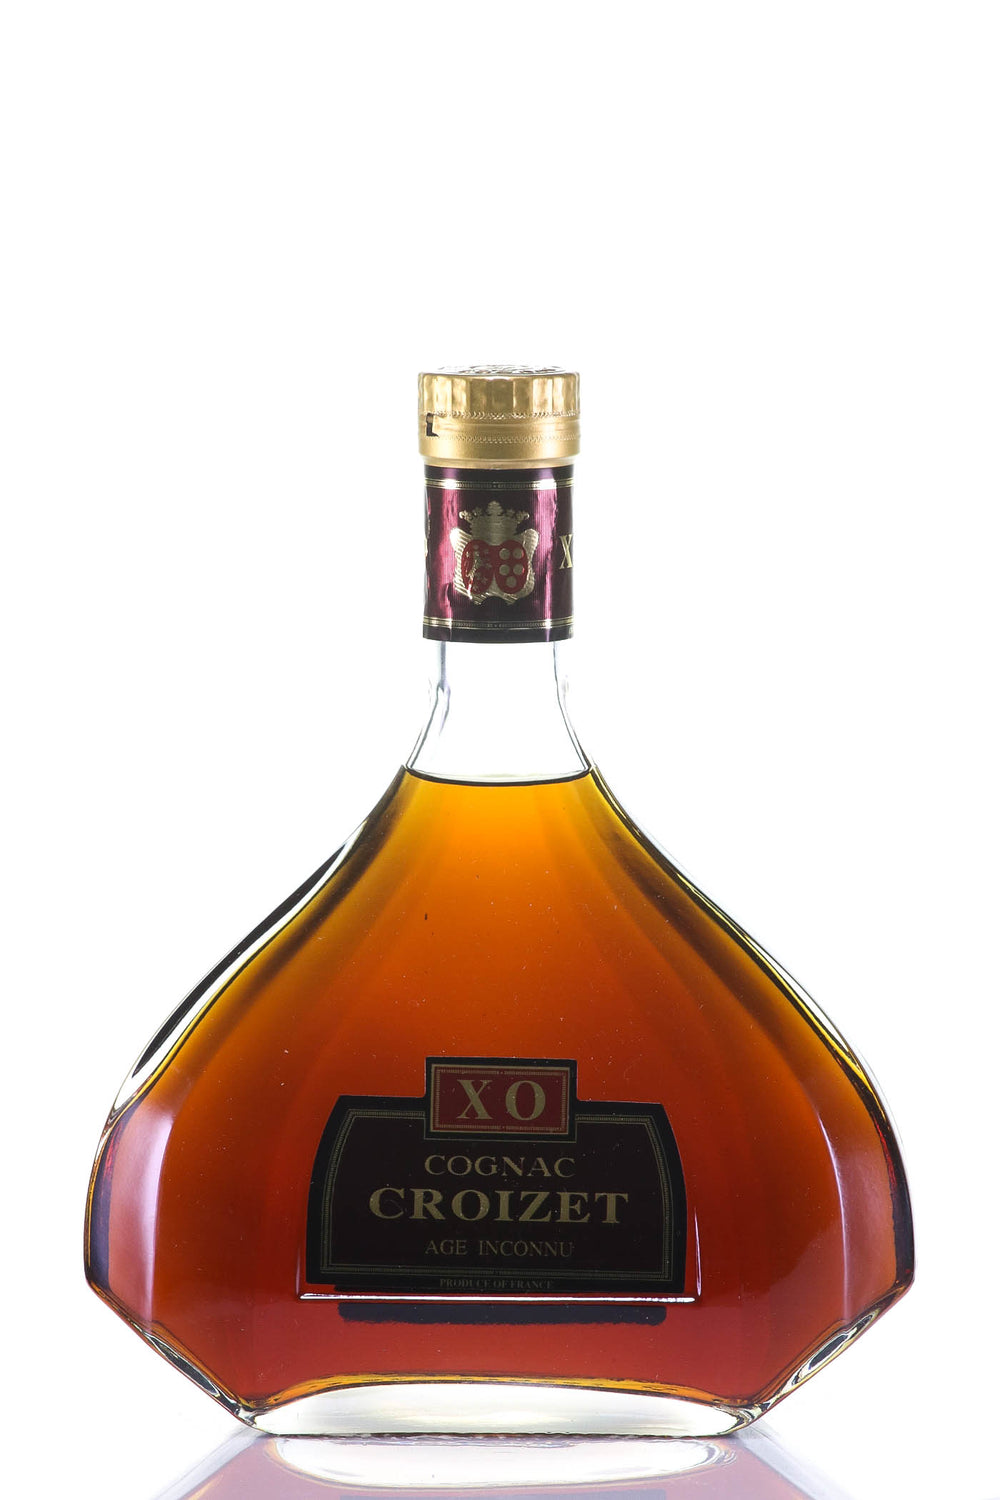 Croizet Cognac d'Age Inconnu X.O. in Carafe, Vintage Unspecified - Rue Pinard